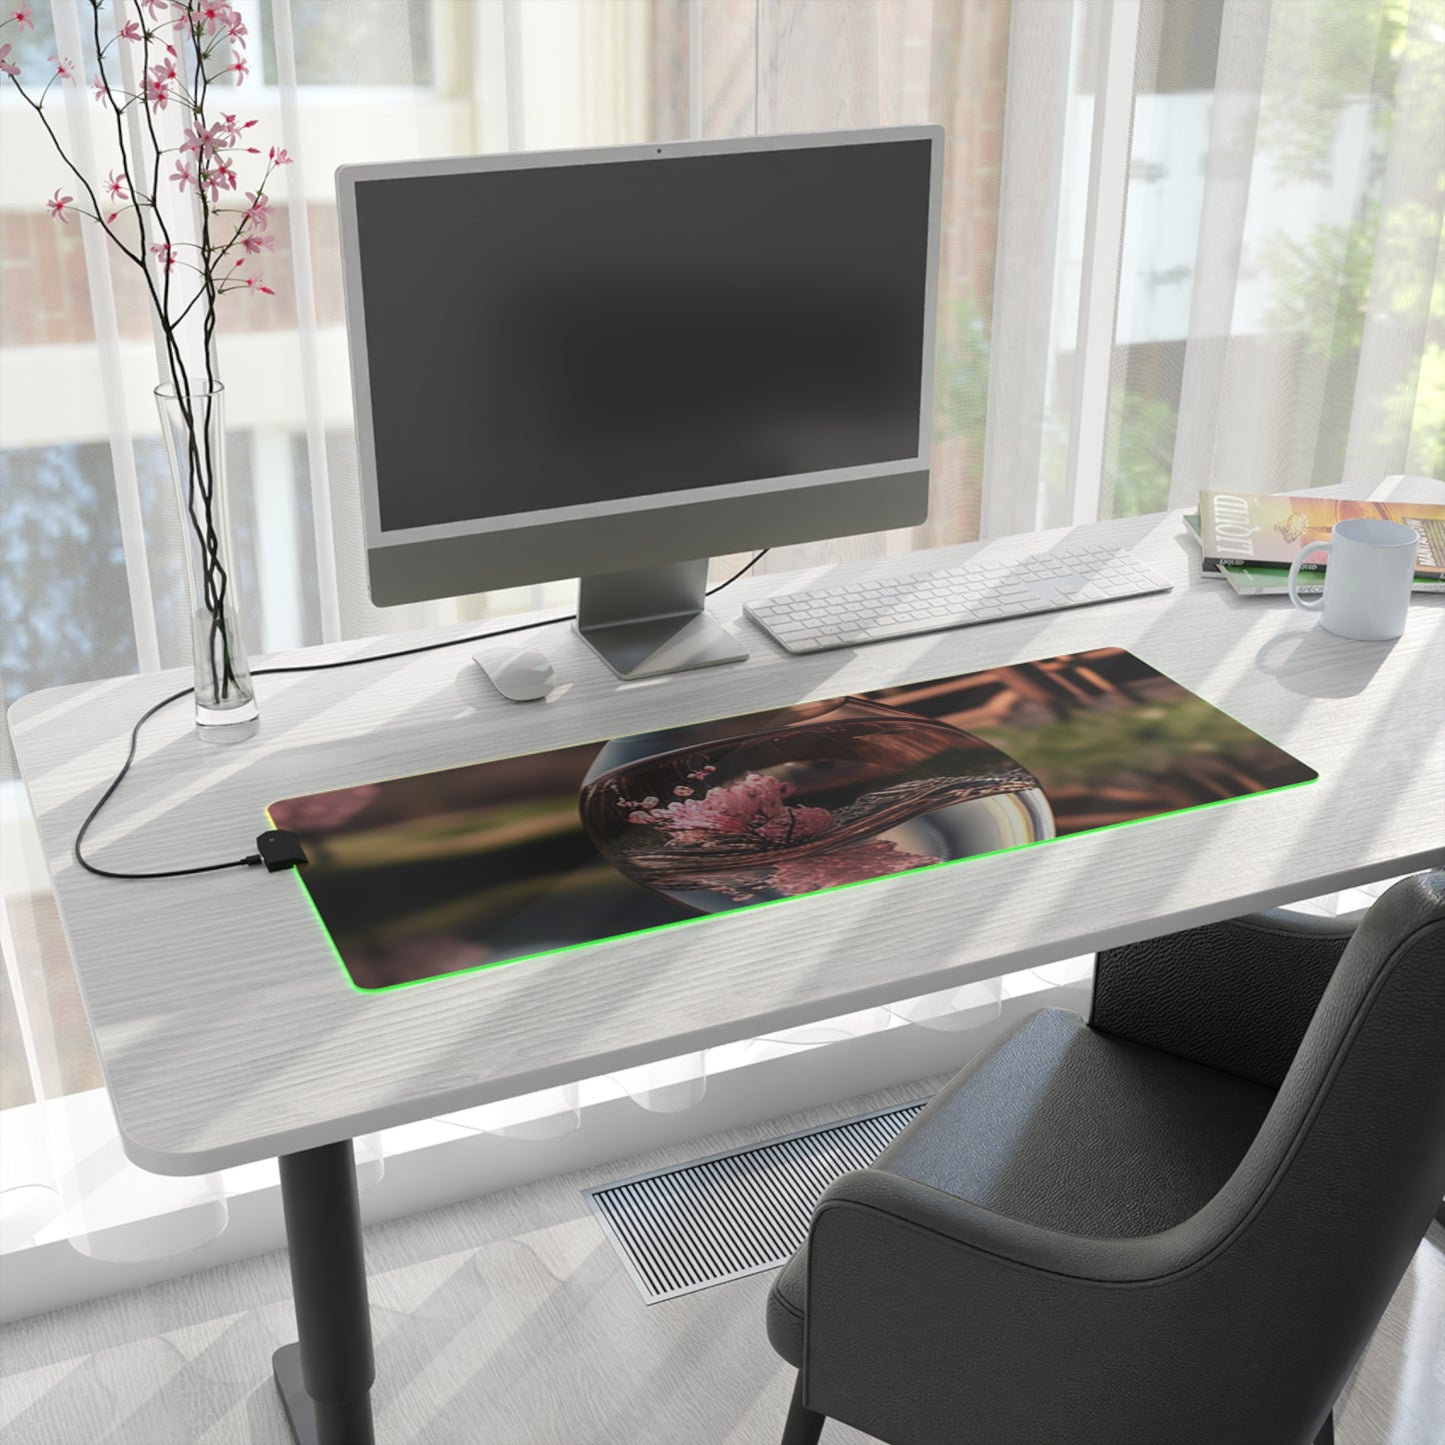 LED Gaming Mouse Pad Cherry Blossom 4